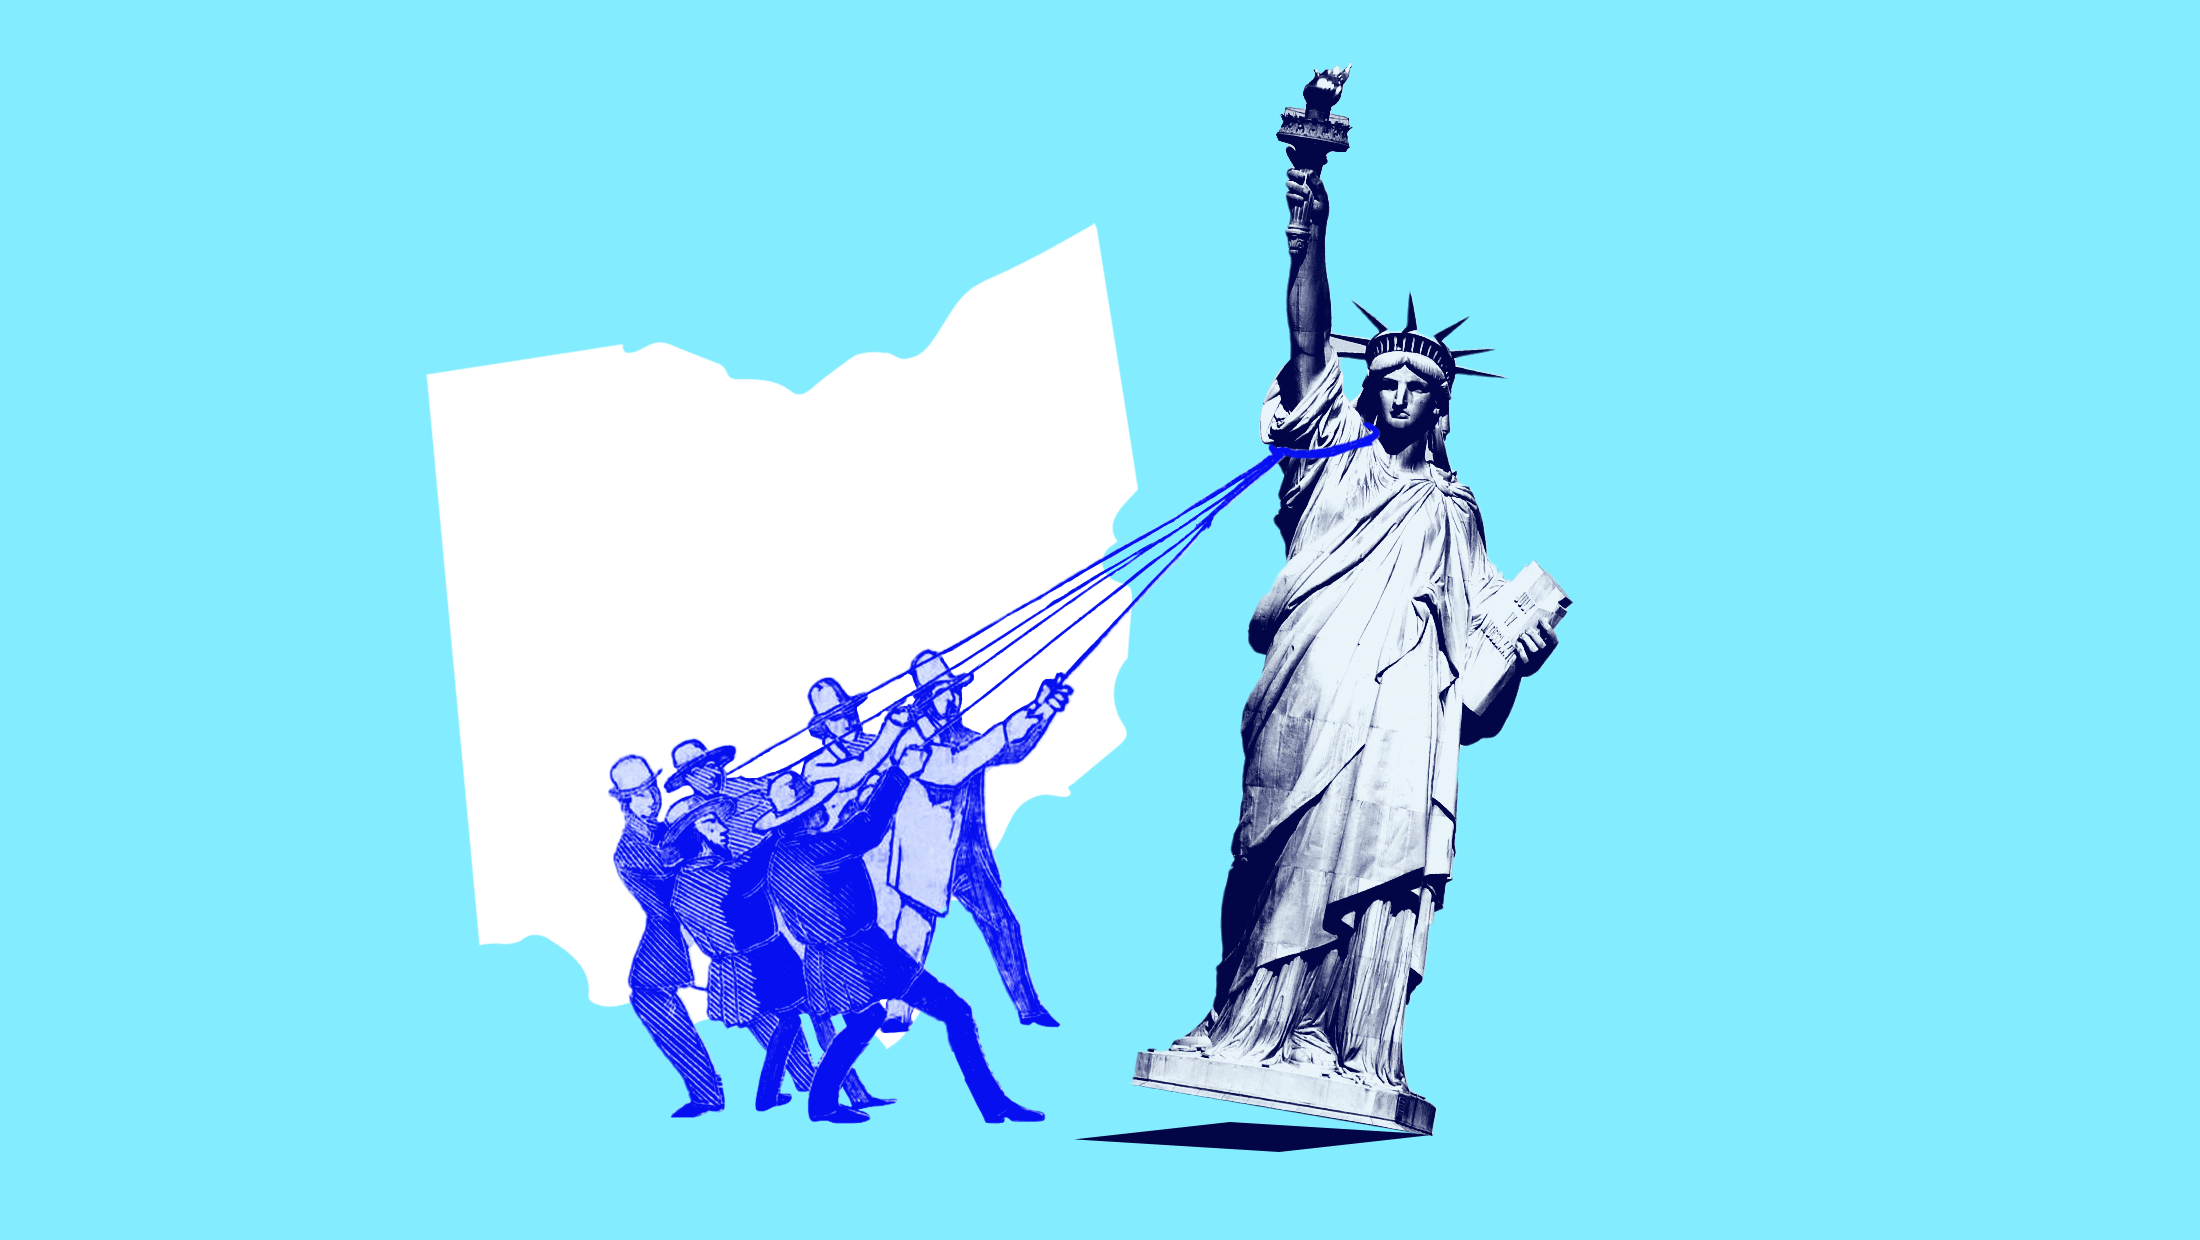 Light blue background with Statue of Liberty falling to the side and blue-toned figures pulling it back into place with ropes and a white-toned image of the shape of Ohio.